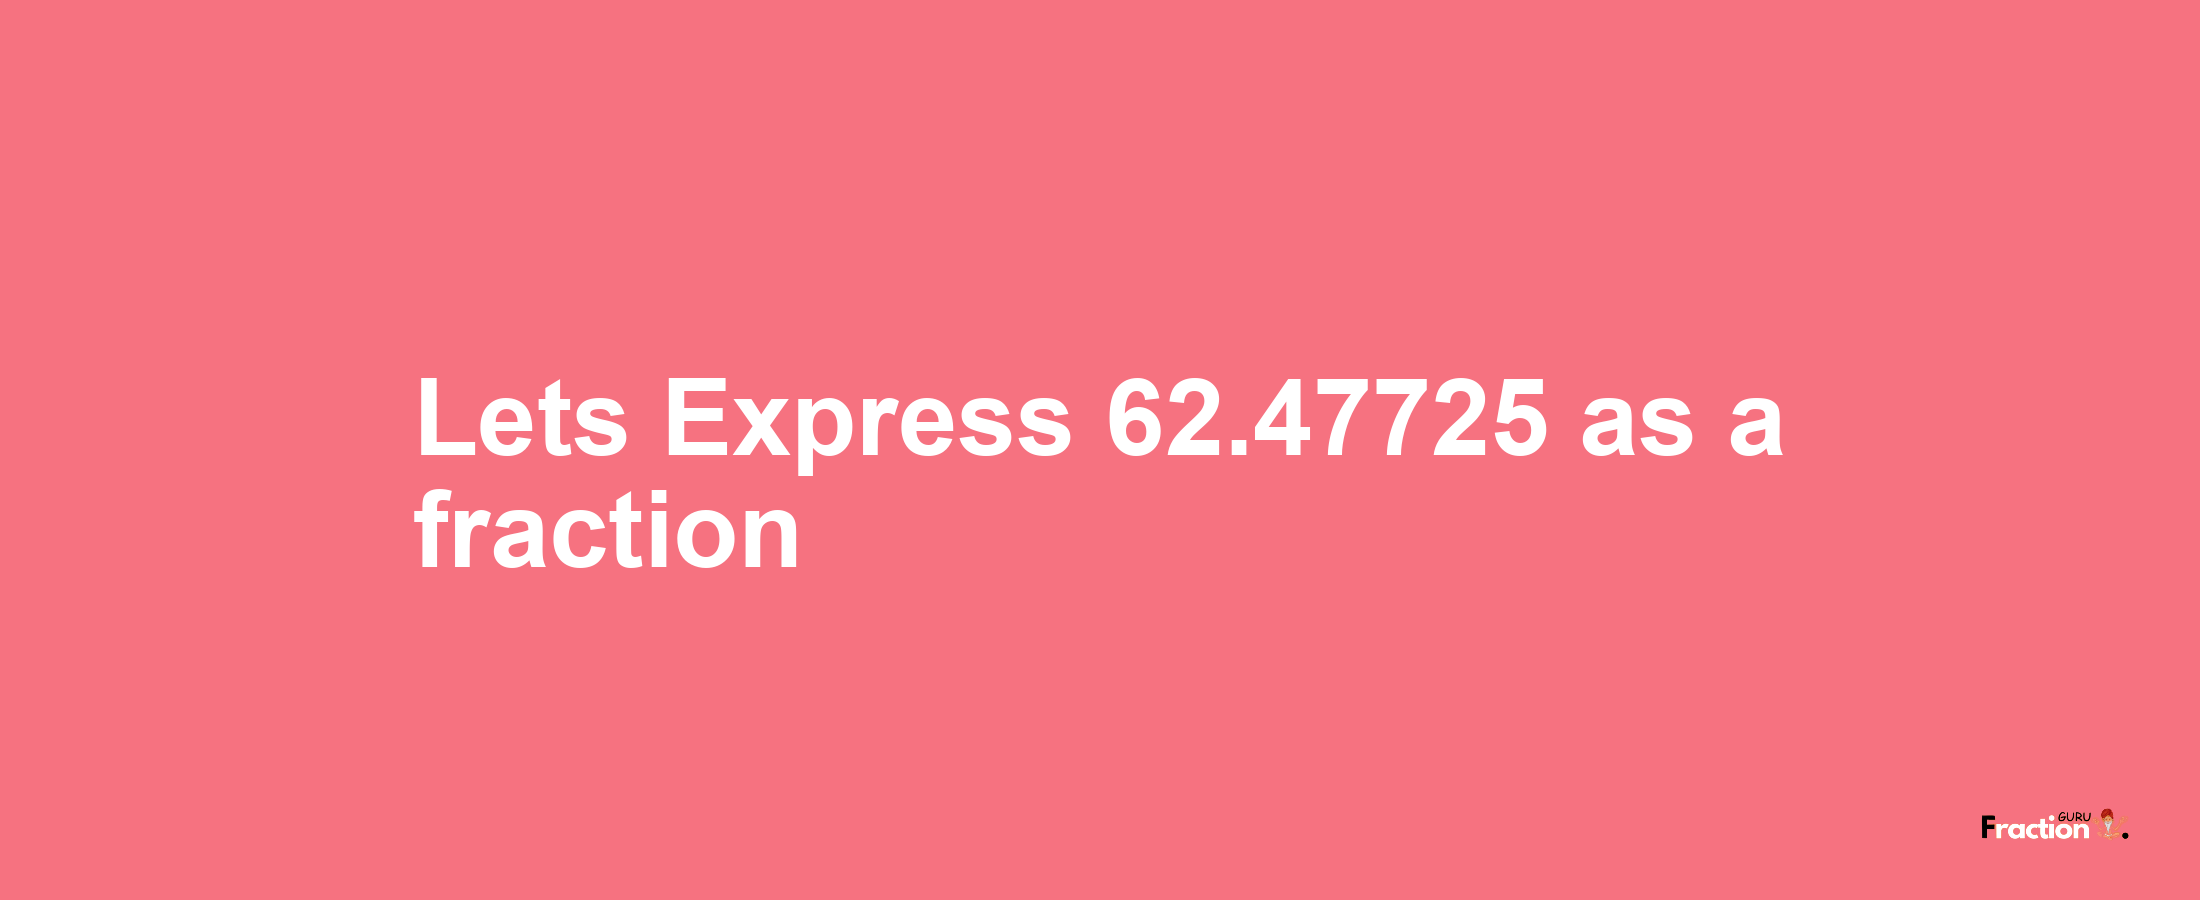 Lets Express 62.47725 as afraction